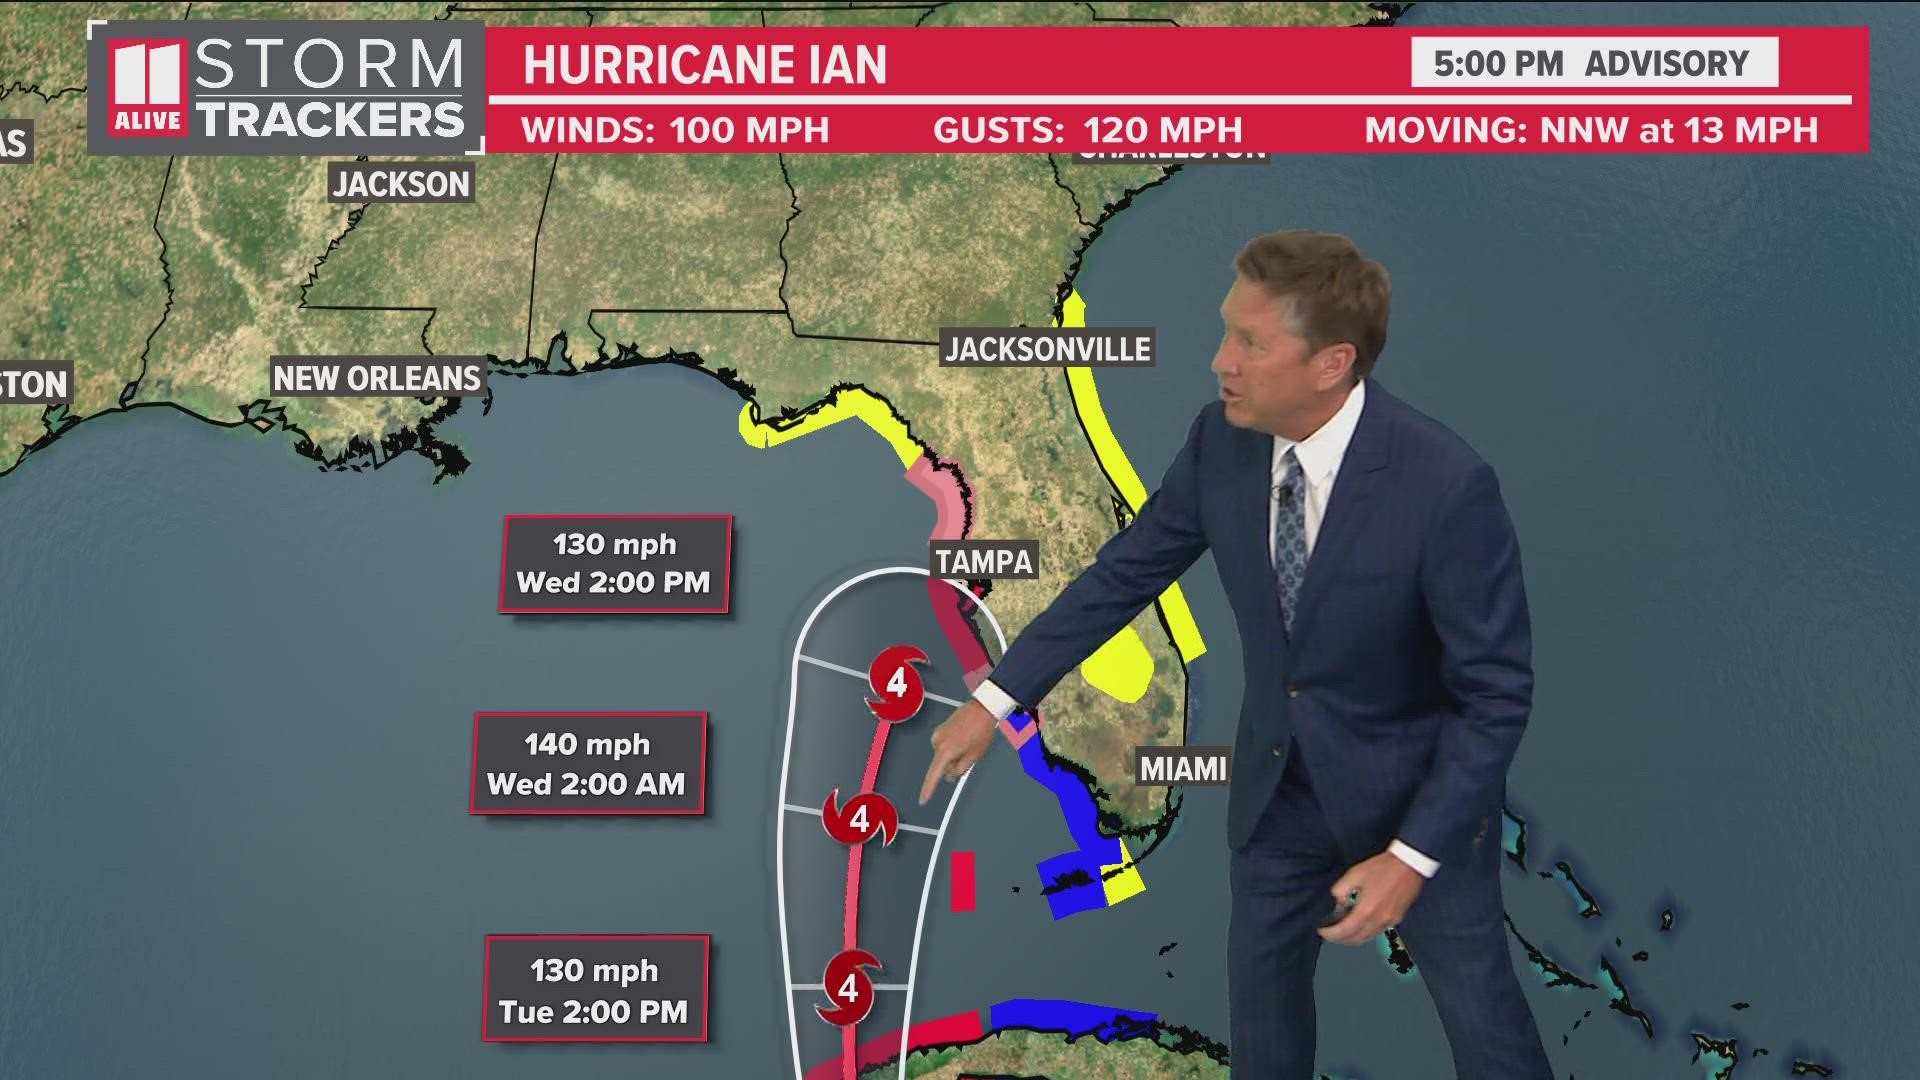 Ian has potential to strengthen into a major category 4 hurricane with model trends bringing the storm into the eastern Gulf or Florida by Wednesday.